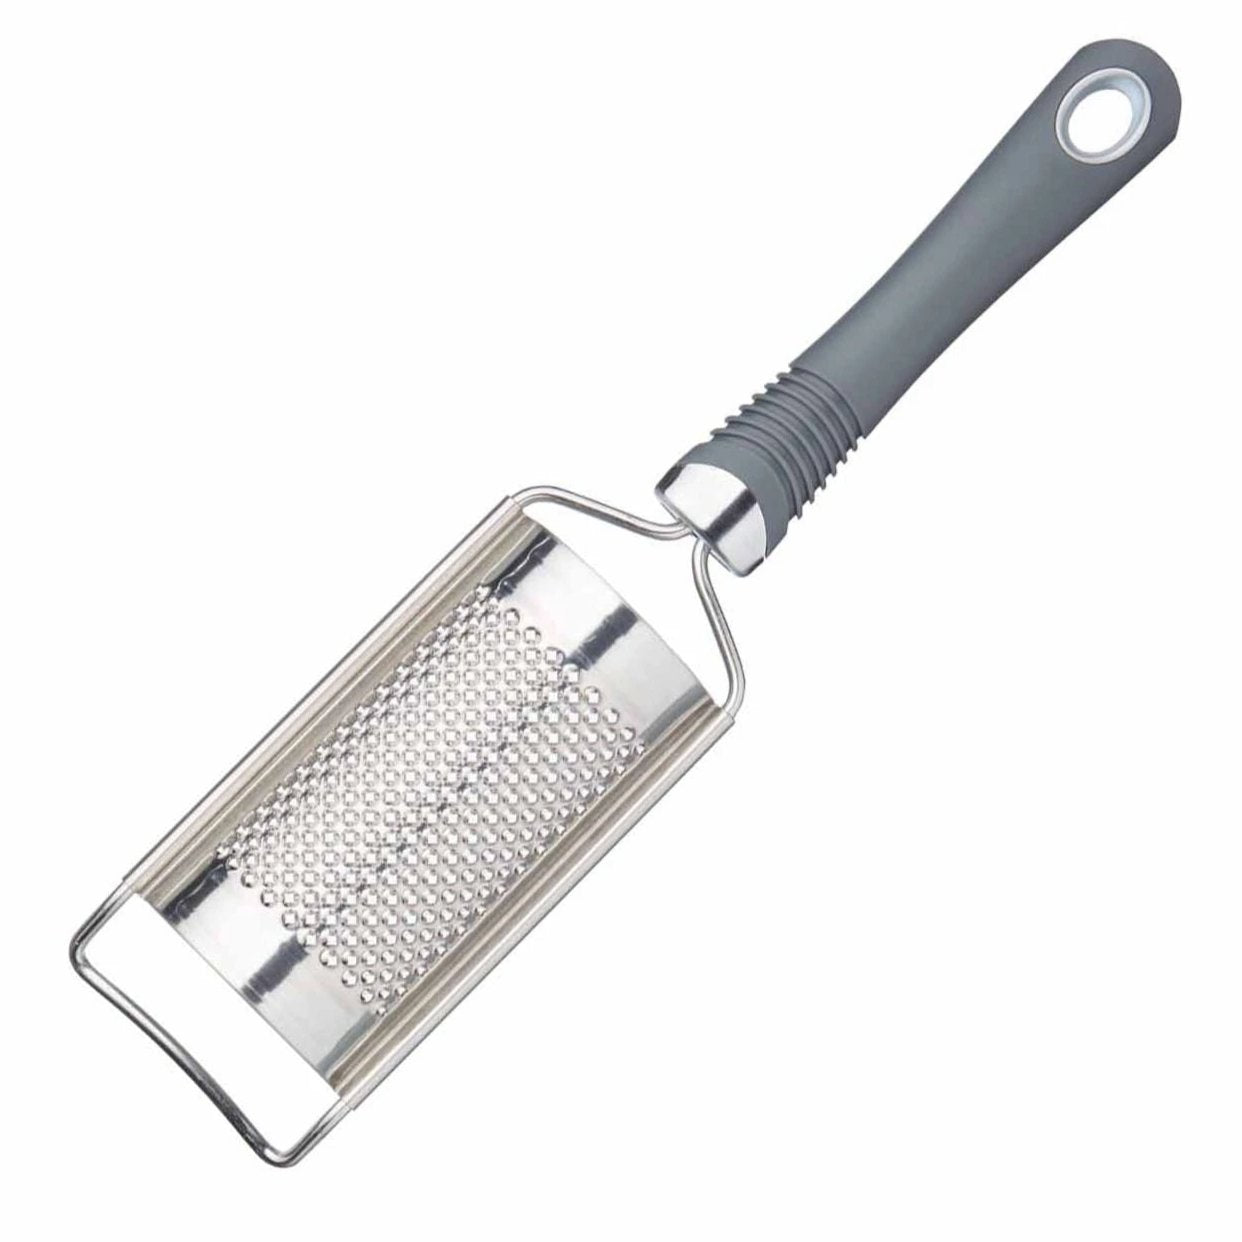 KitchenCraft Professional Cheese / Nutmeg / Zester Grater with Soft-Grip Handle - The Cooks Cupboard Ltd